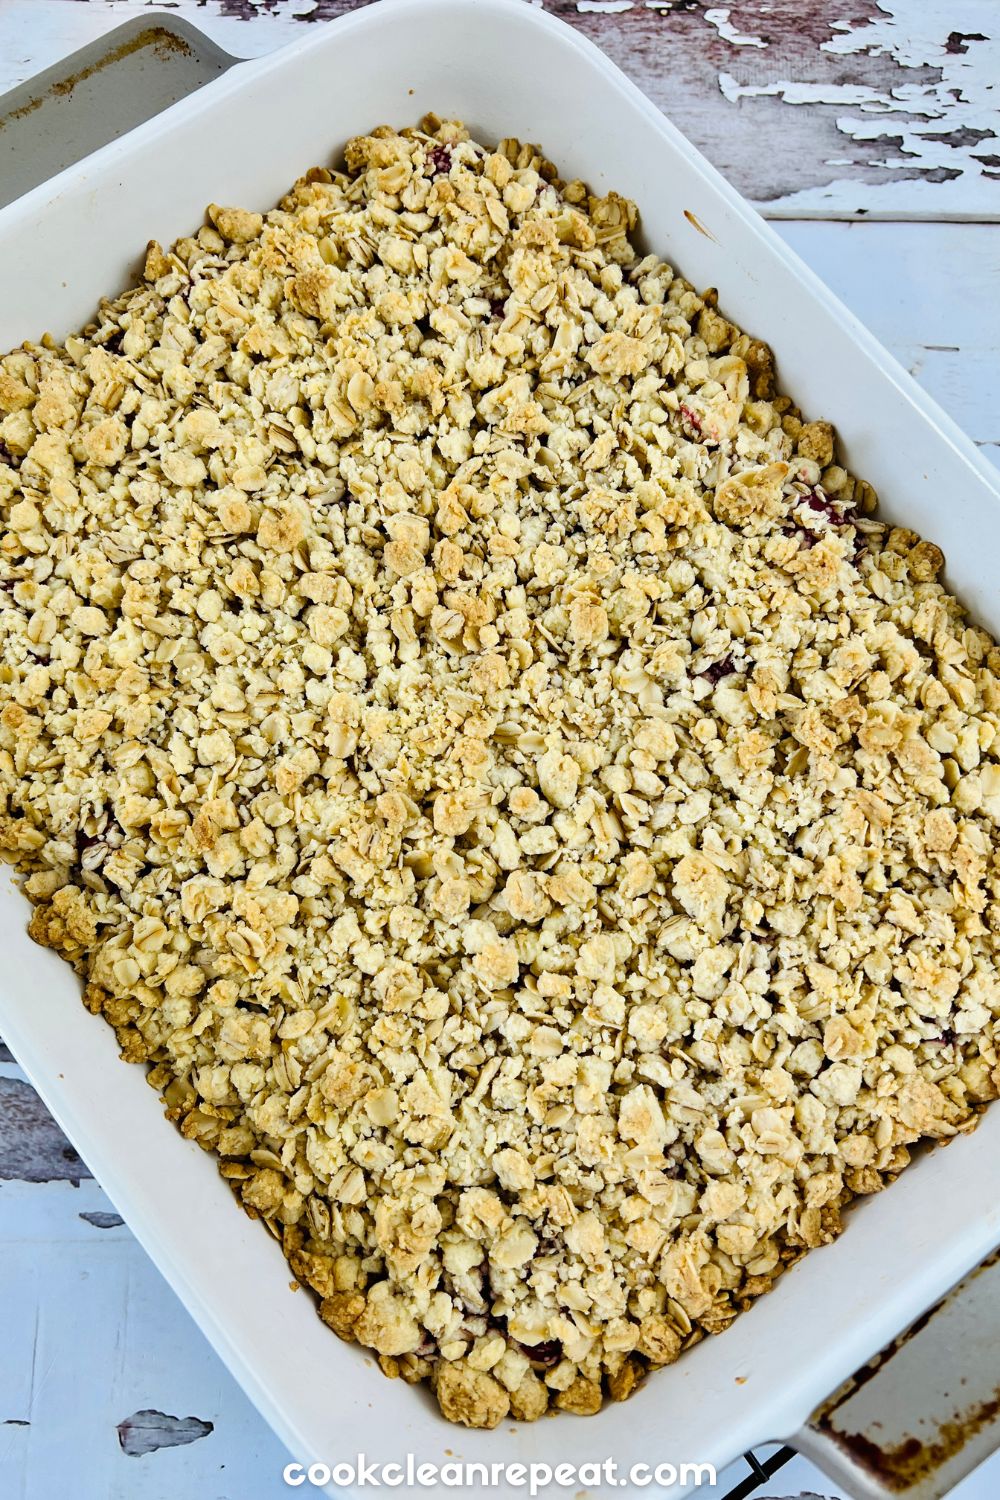 The cherry bars in a baking dish after being taken out of the oven